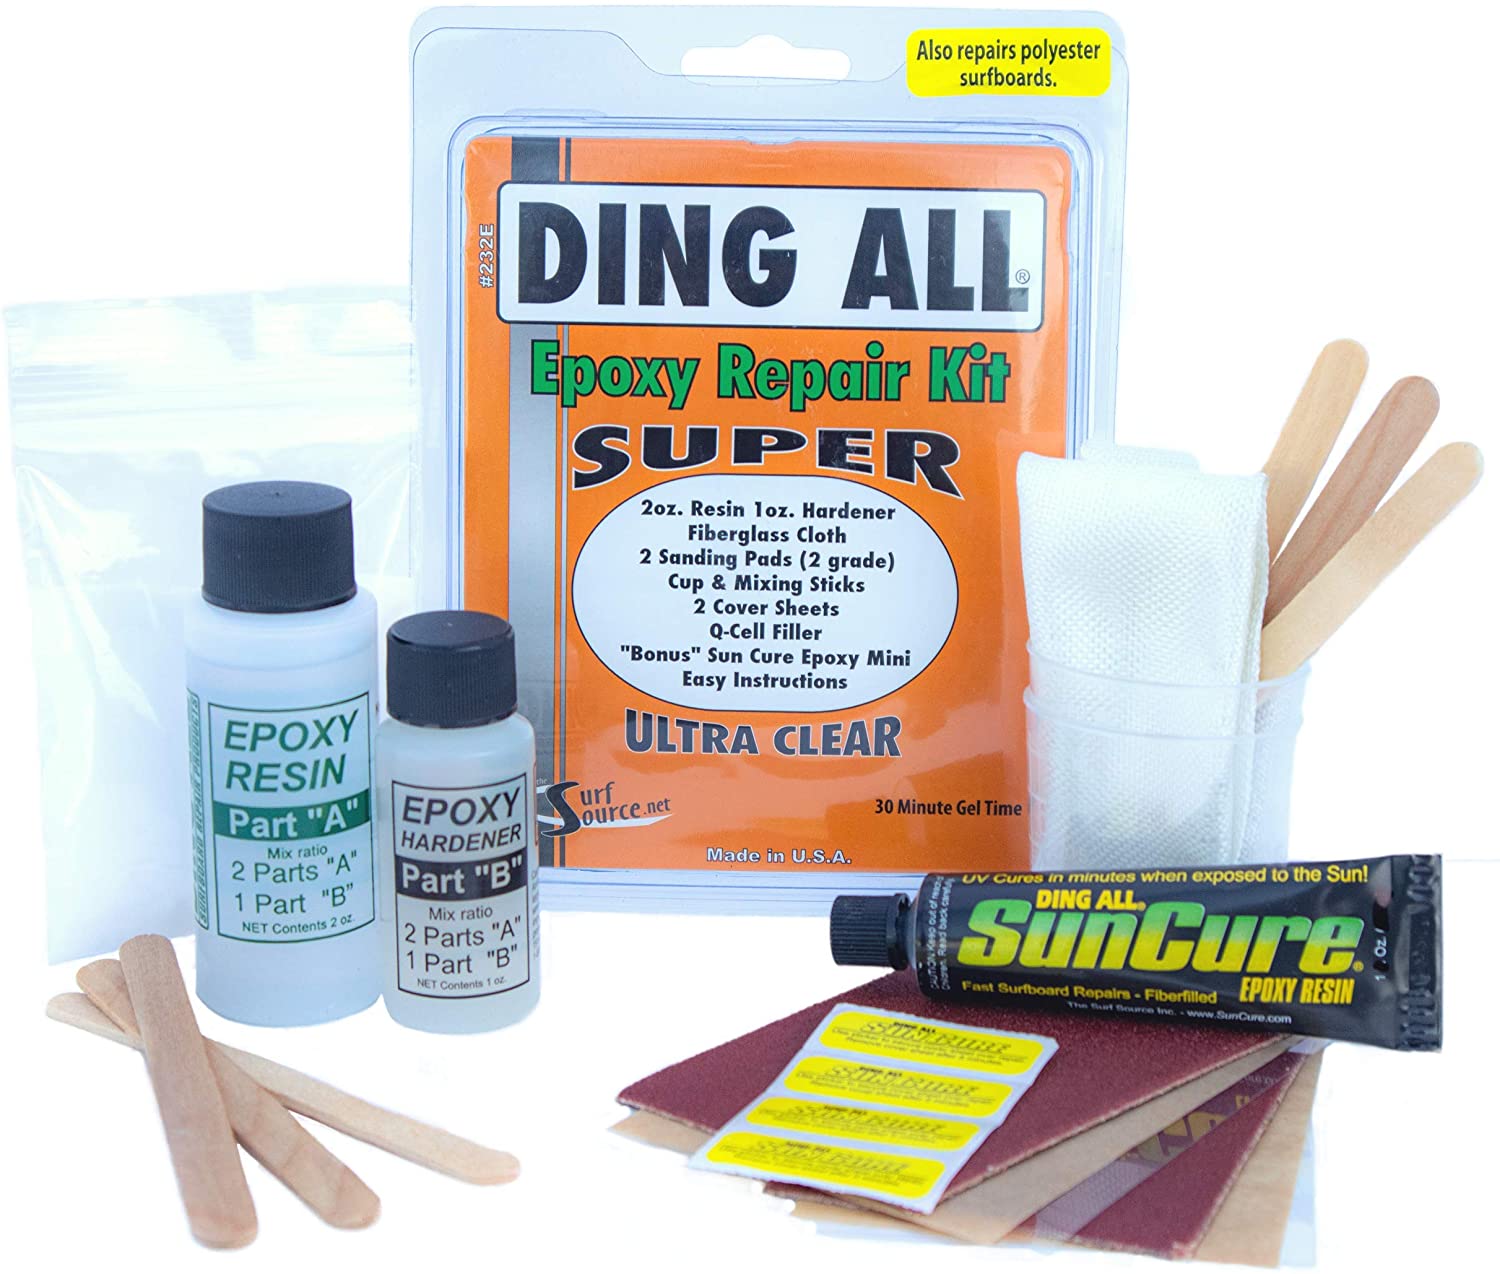 Ding All 3 Oz (84ml) Super Epoxy Repair Kit for Small to Medium Size Epoxy and Polyester Surfboards Repairs - Invisible Board Shop